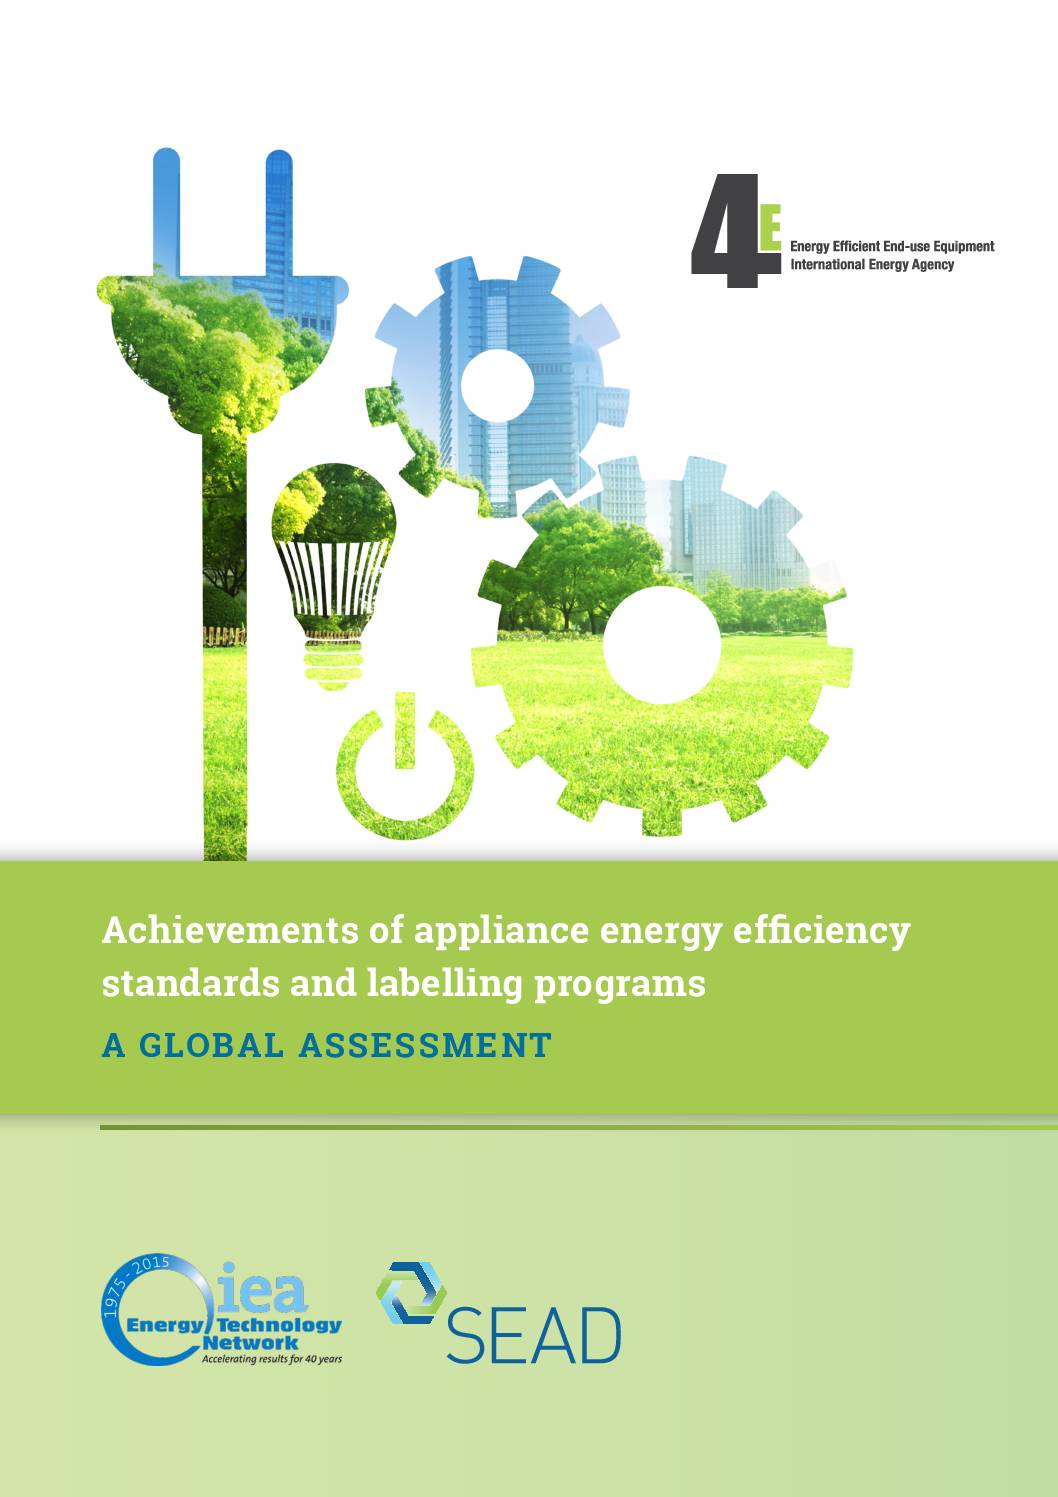 Achievements of appliance energy efficiency standards and labelling programs – a global assessment